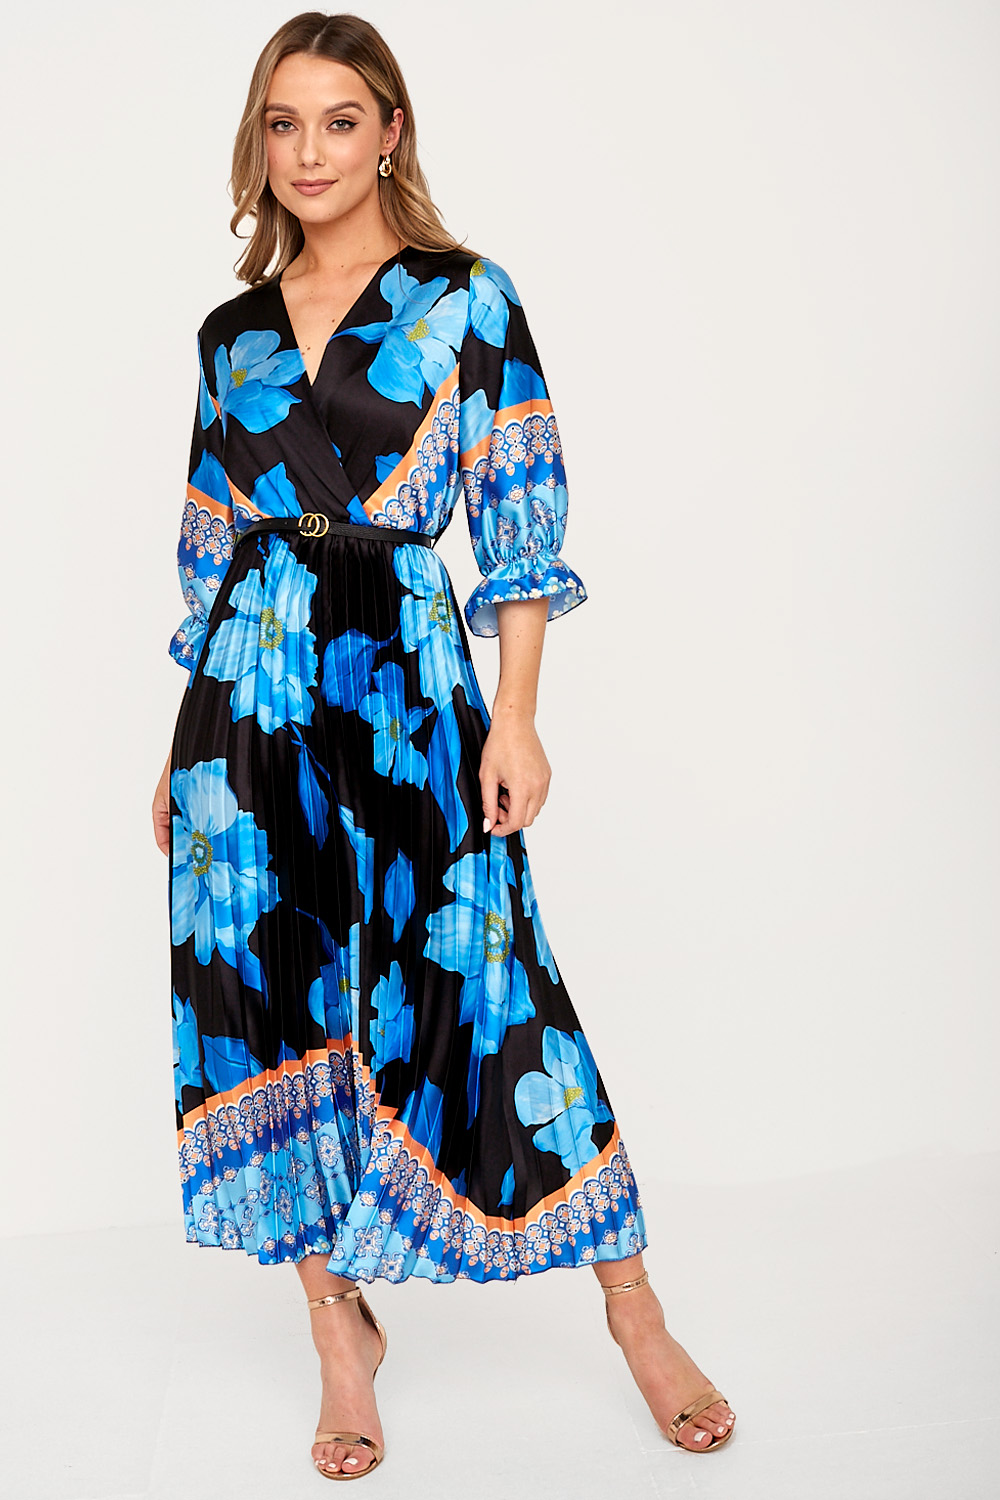 Rowen Floral Wrap Dress in Blue | iCLOTHING - iCLOTHING